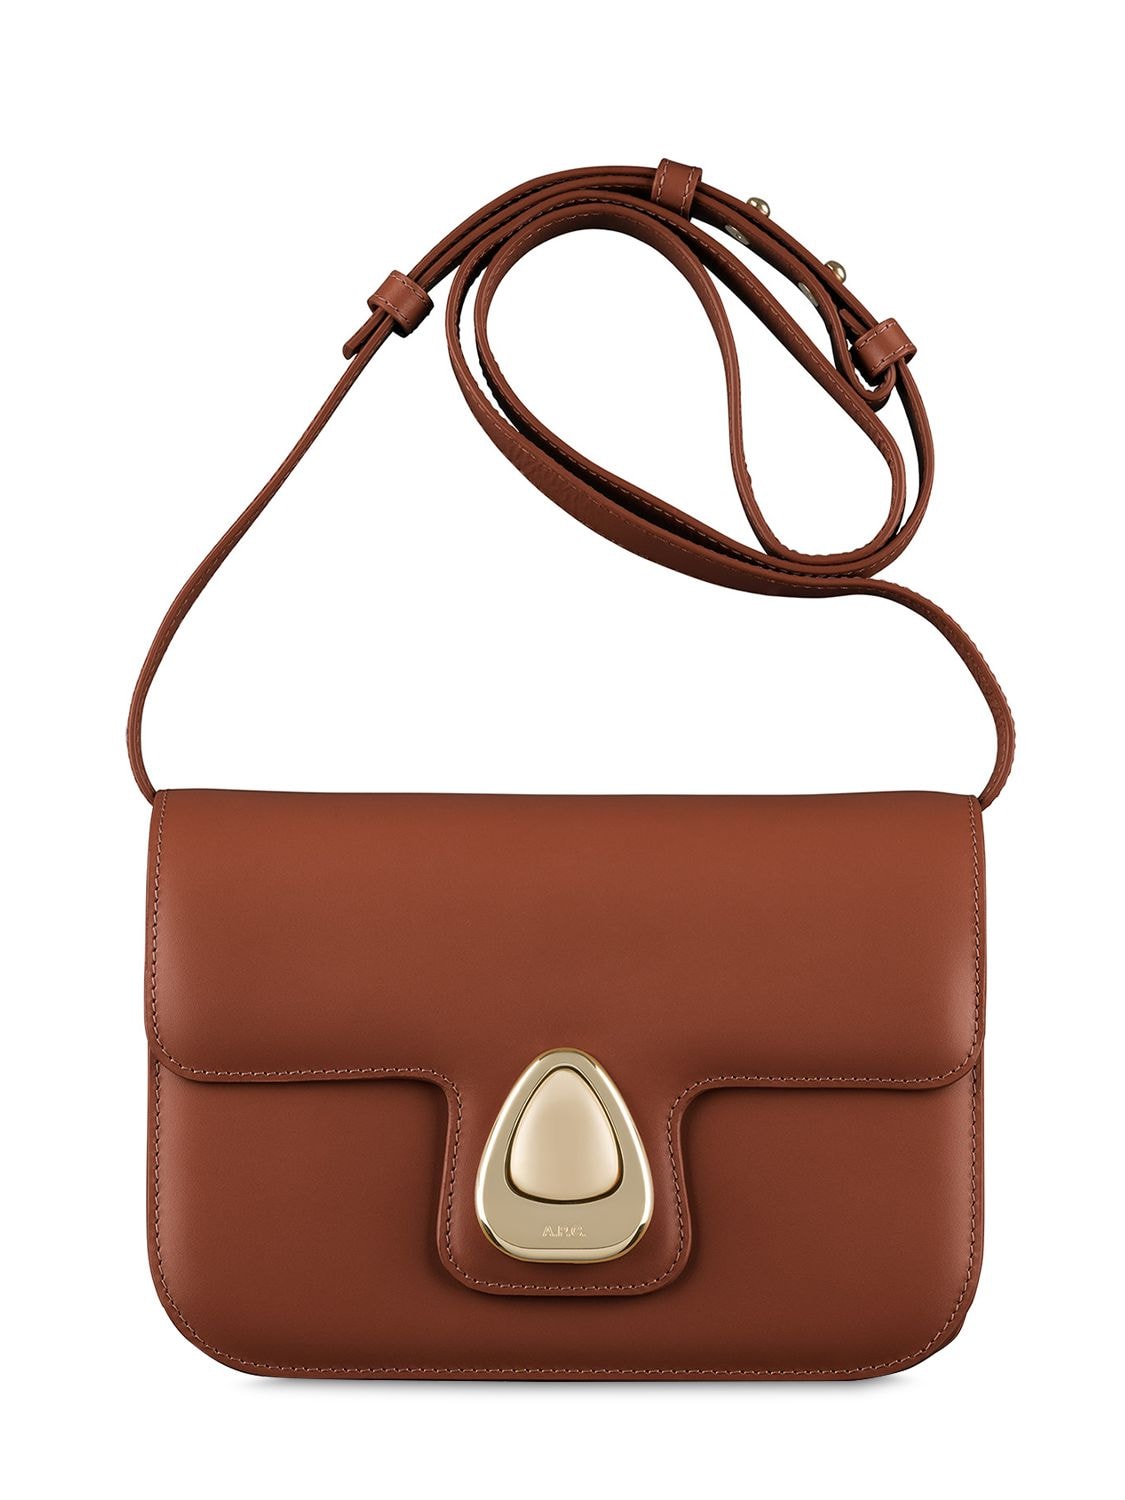 Image of Small Sac Astra Leather Shoulder Bag